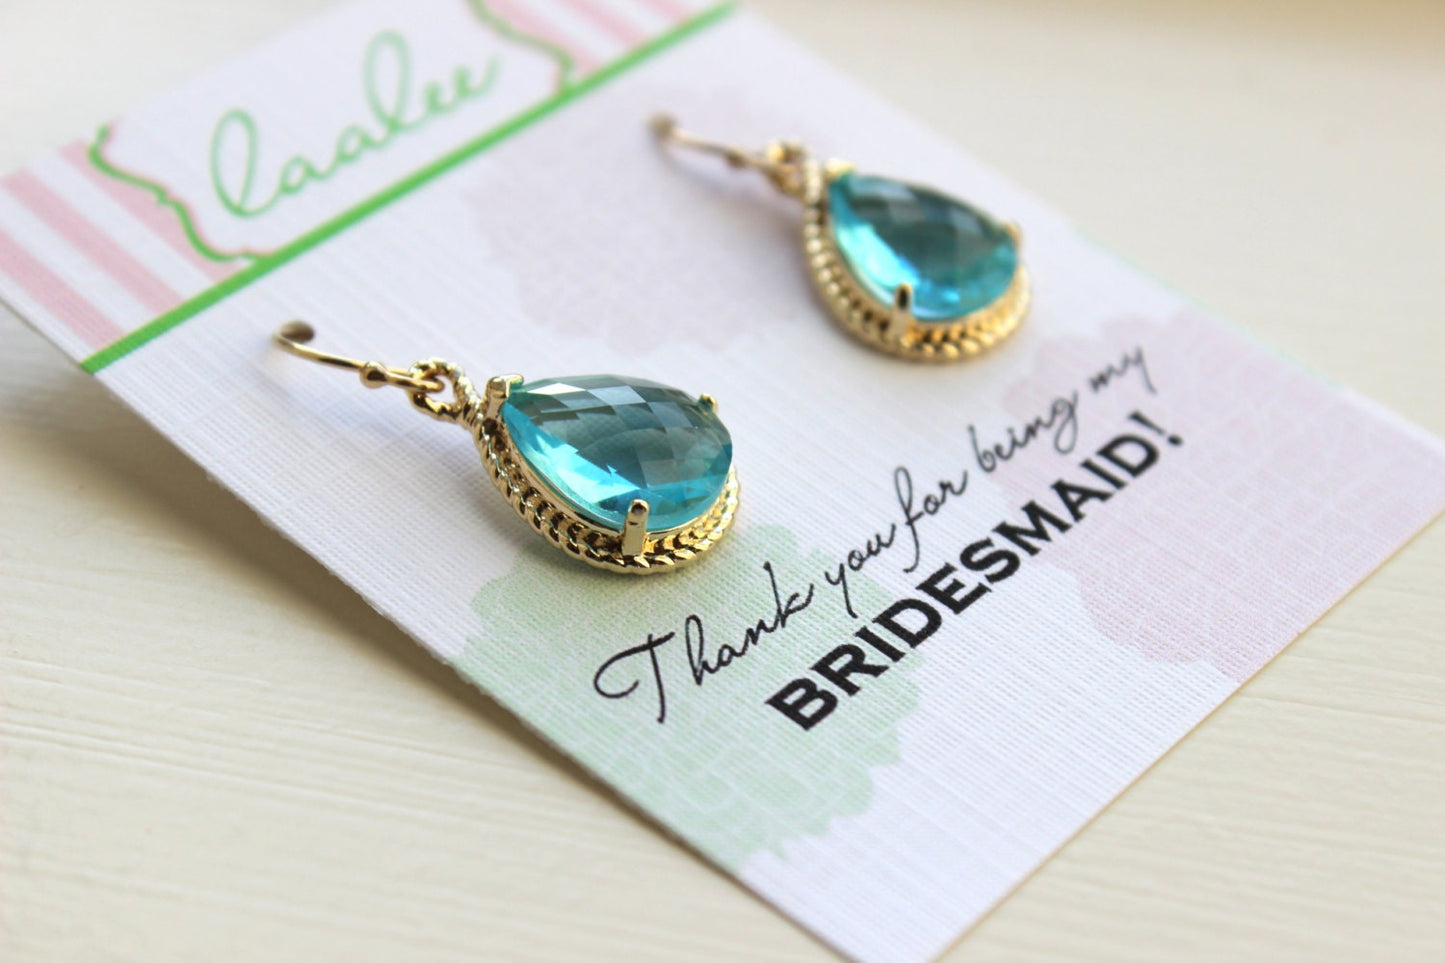 Aquamarine Earrings Gold Blue Earrings - Bridesmaid Thank You Card - Thank you for being my bridesmaid - Blue Topaz Bridal Wedding Jewelry